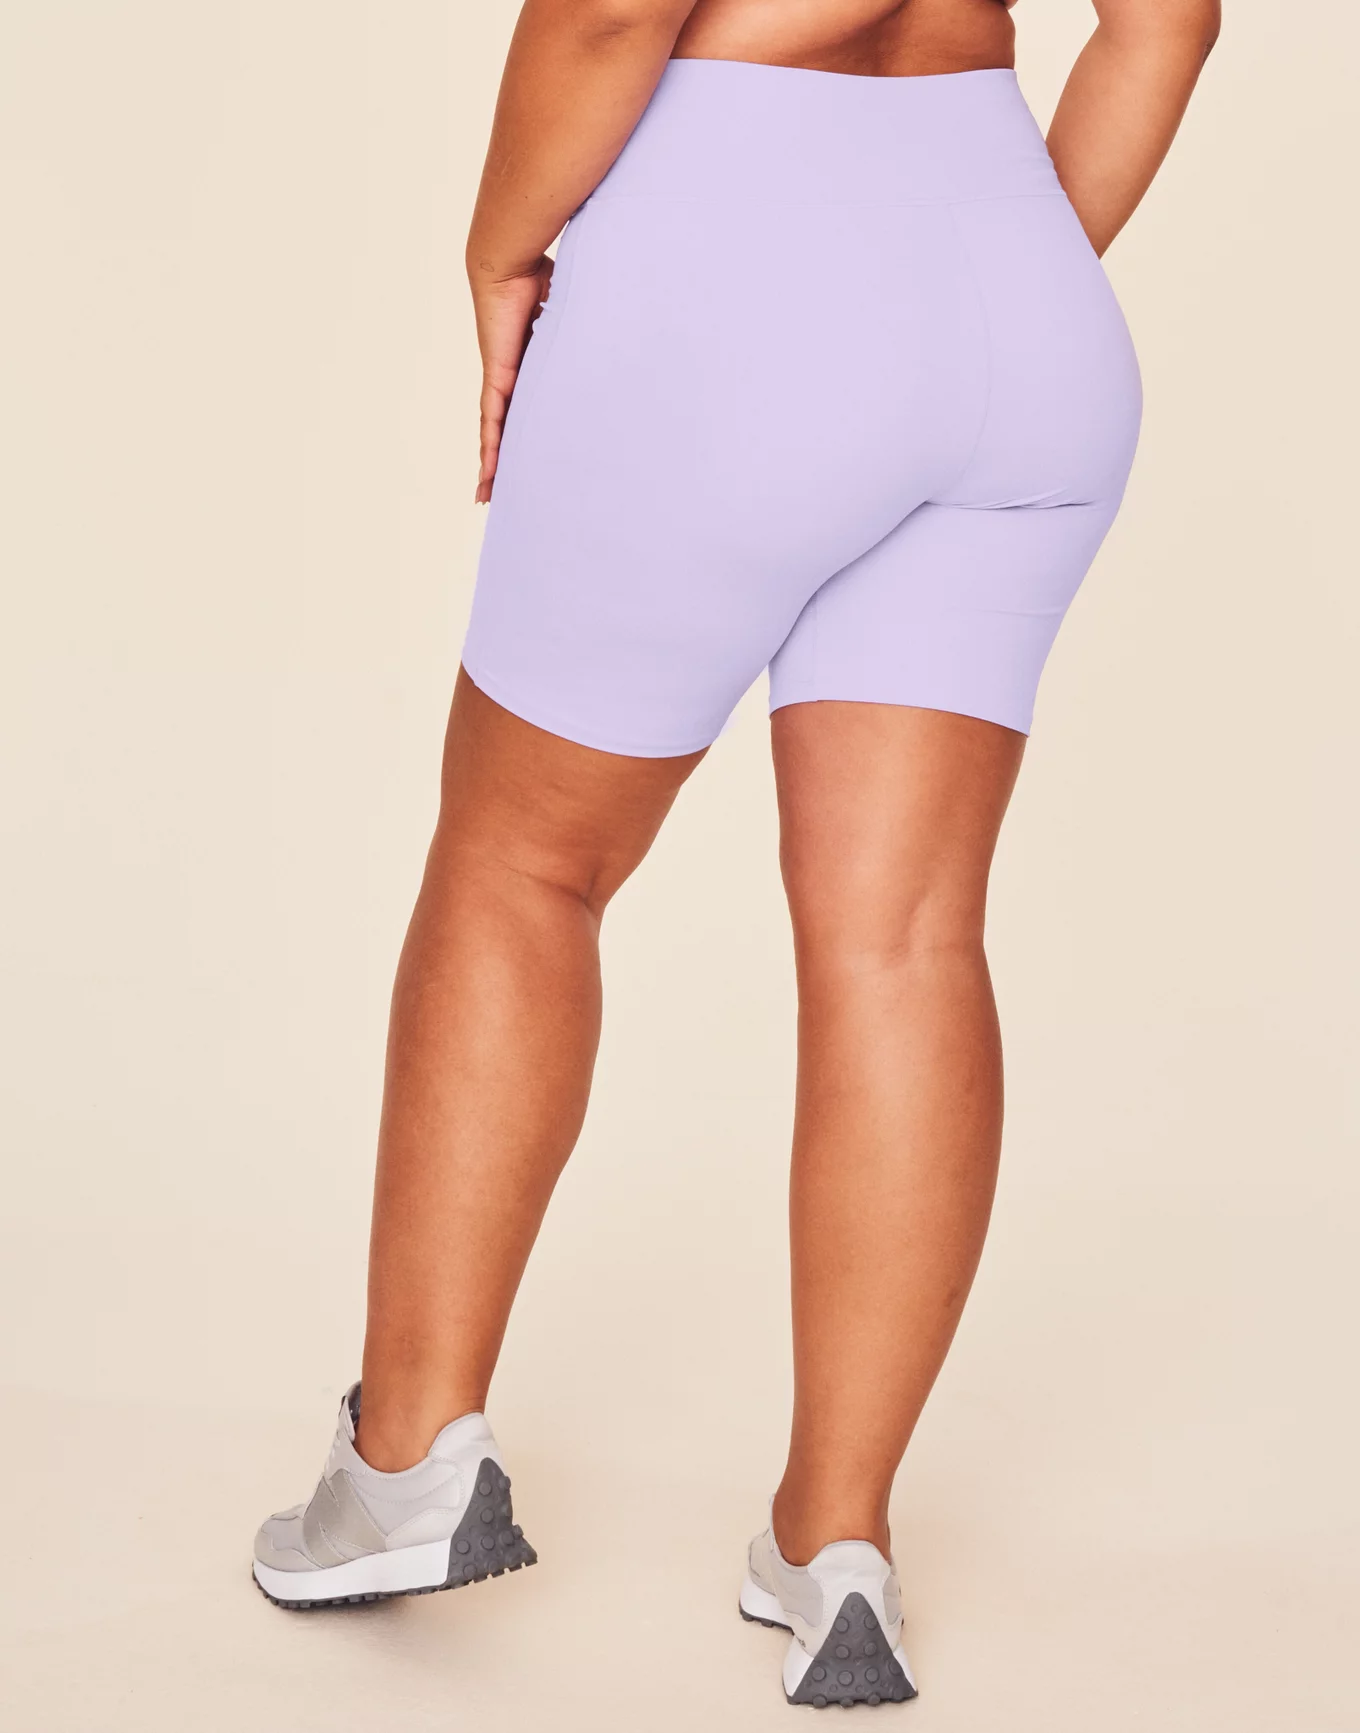 Pocketed Purple Biker Shorts  Unseen Beauty Quality Athleisure